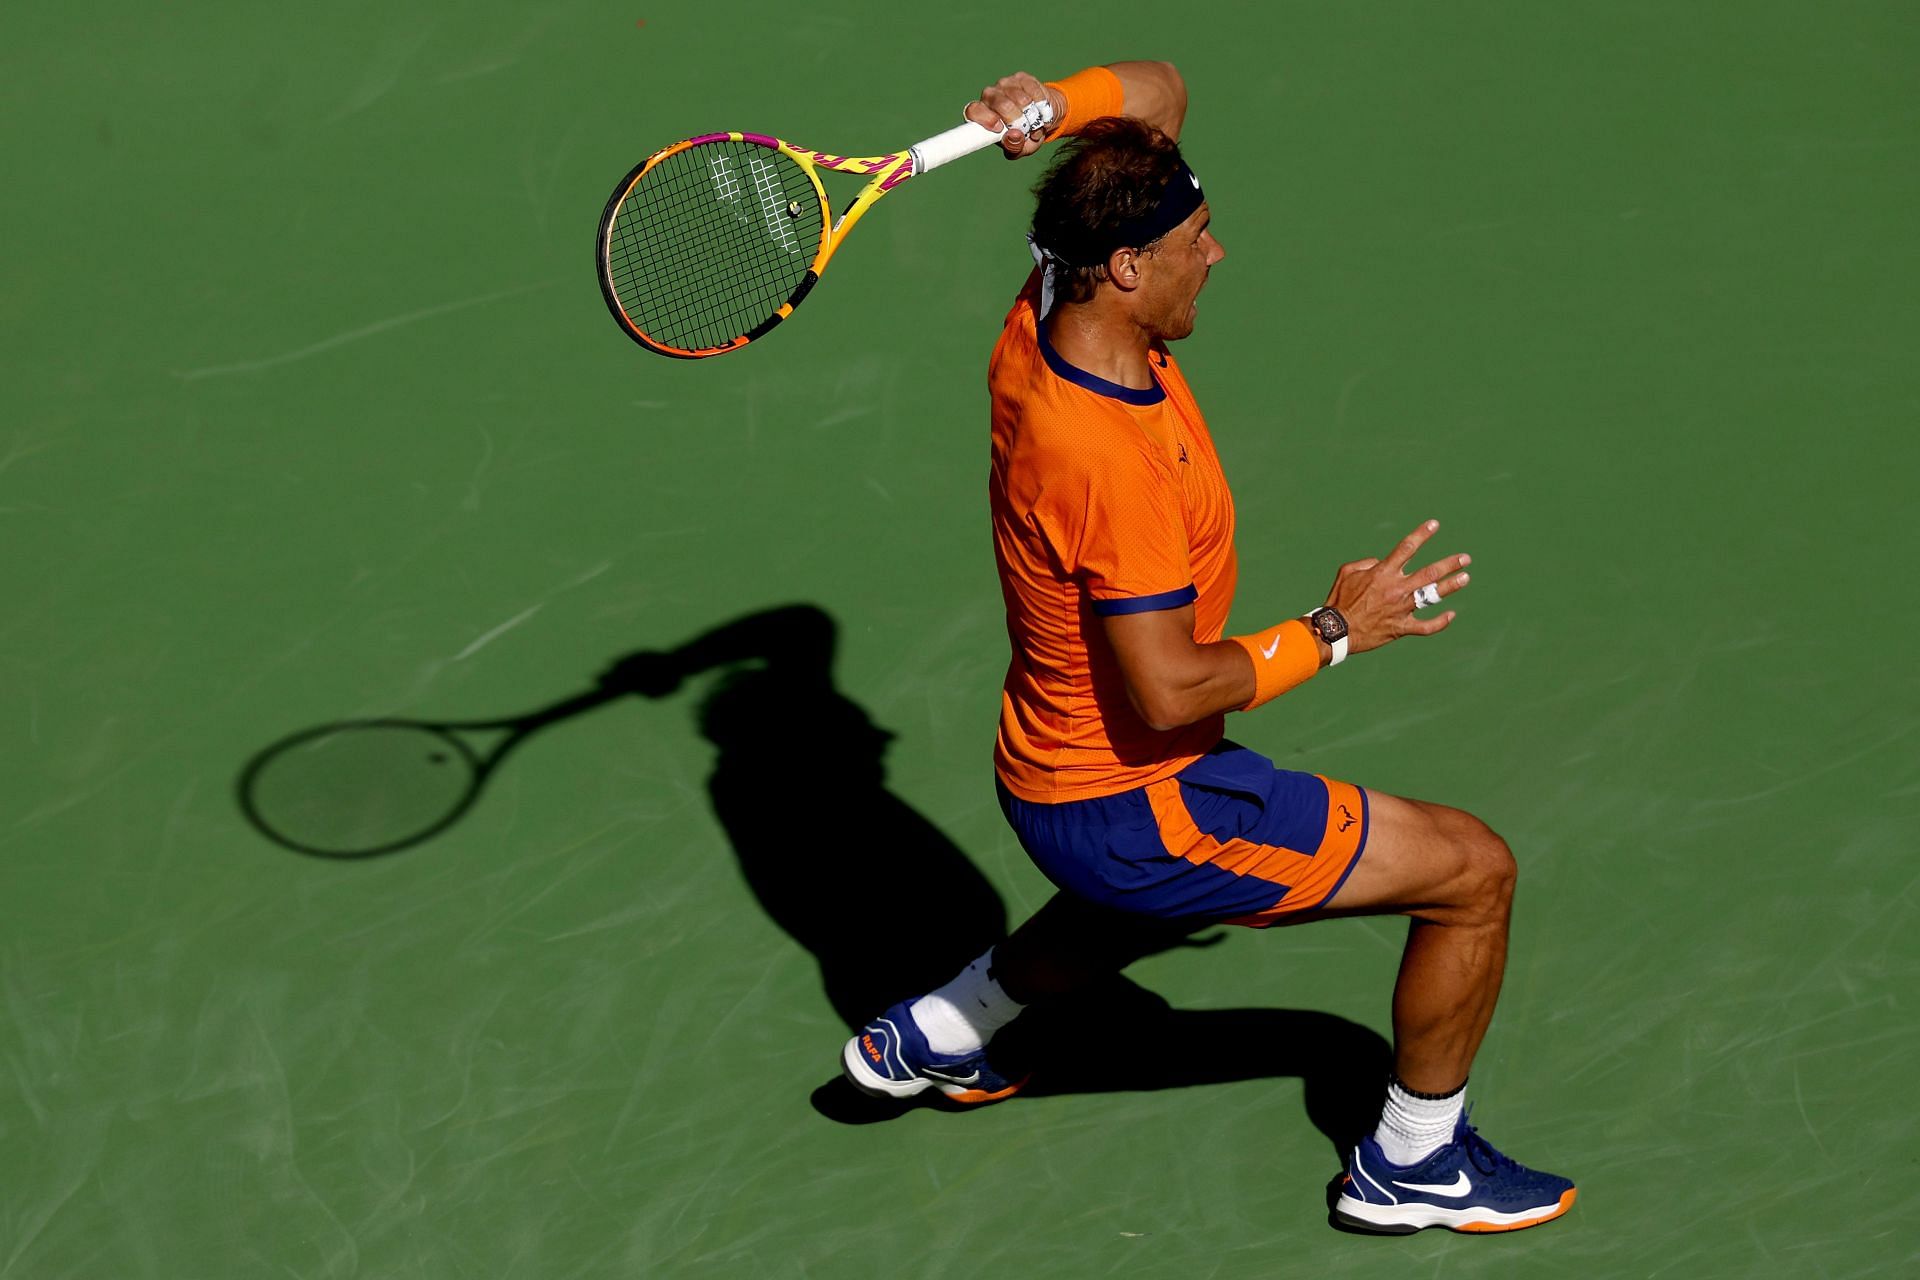 Nadal in action at Indian Wells